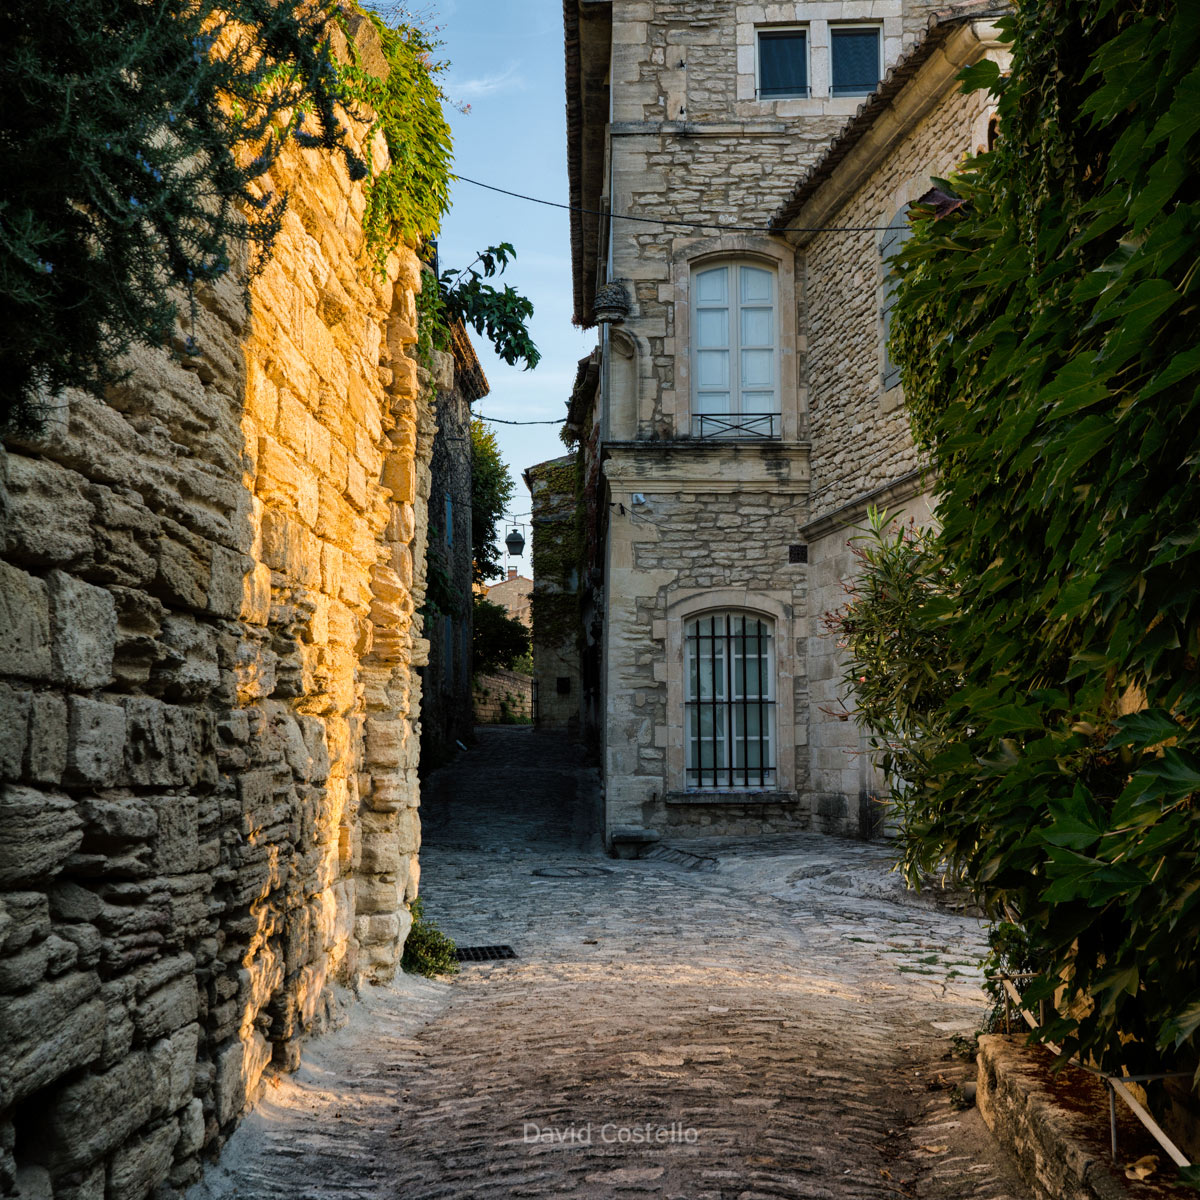 Crossing paths with the sun along cobbled streets that takes your breath away in Gordes.